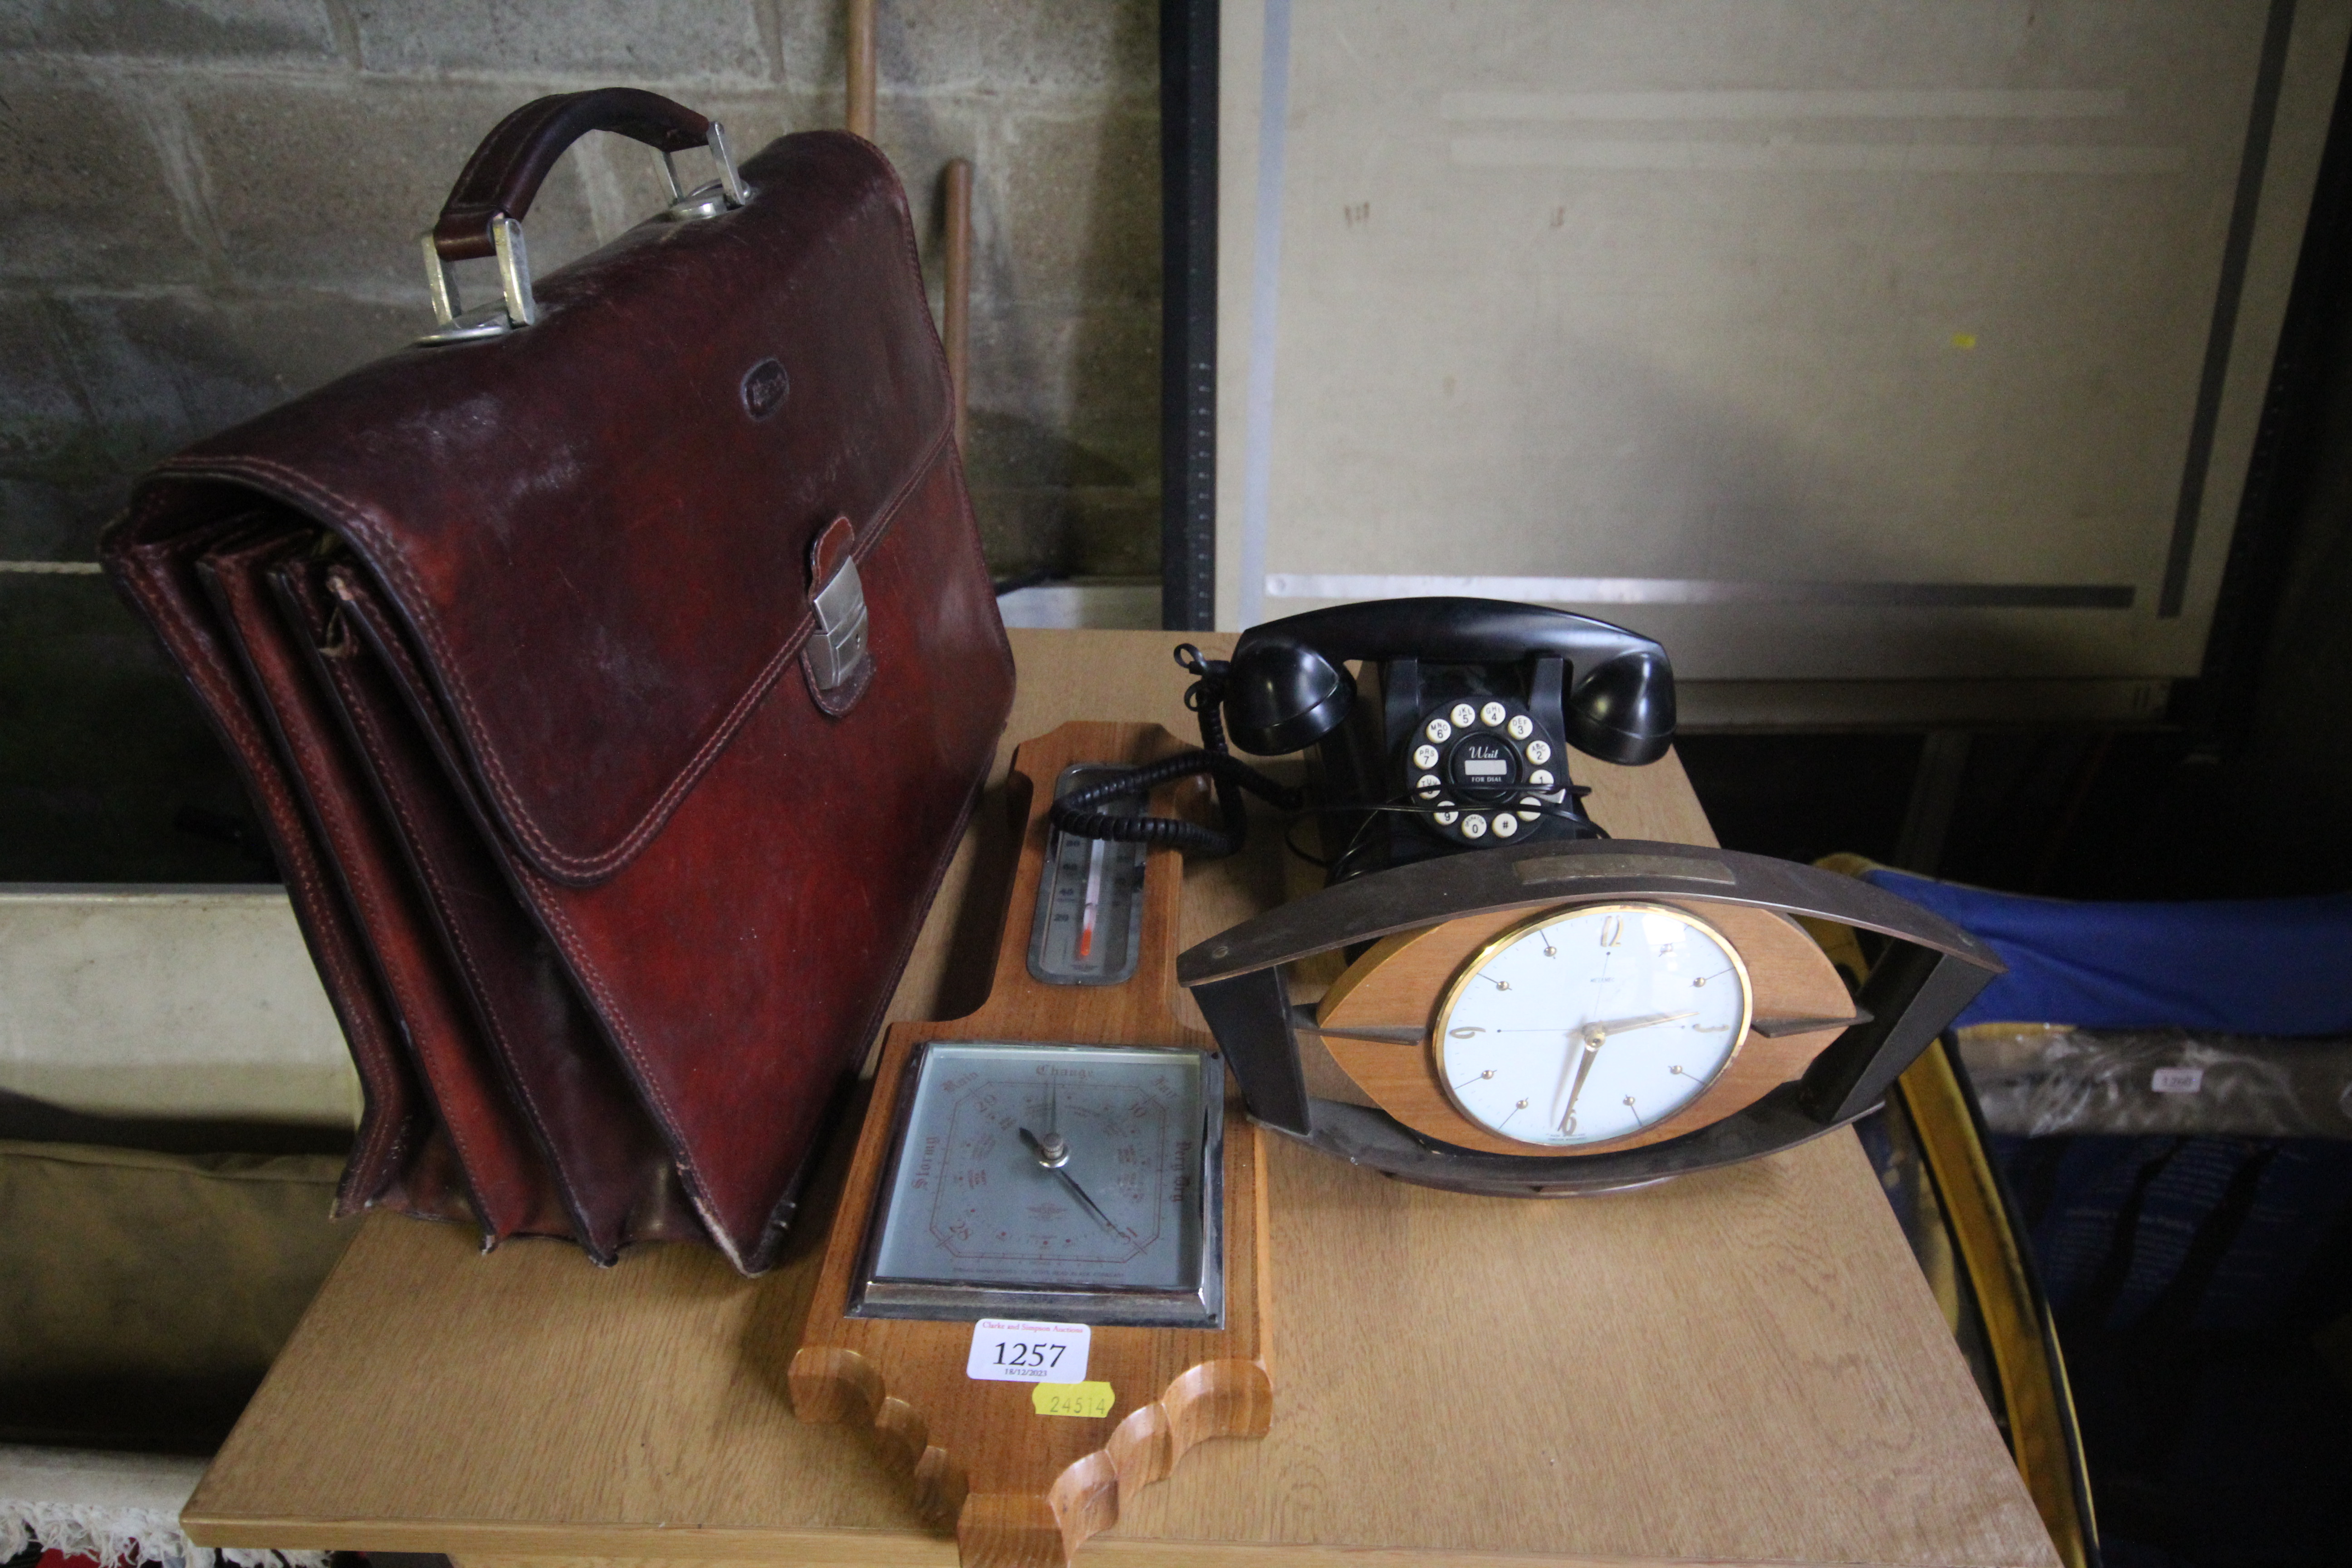 A leather briefcase, a wall hanging barometer, an